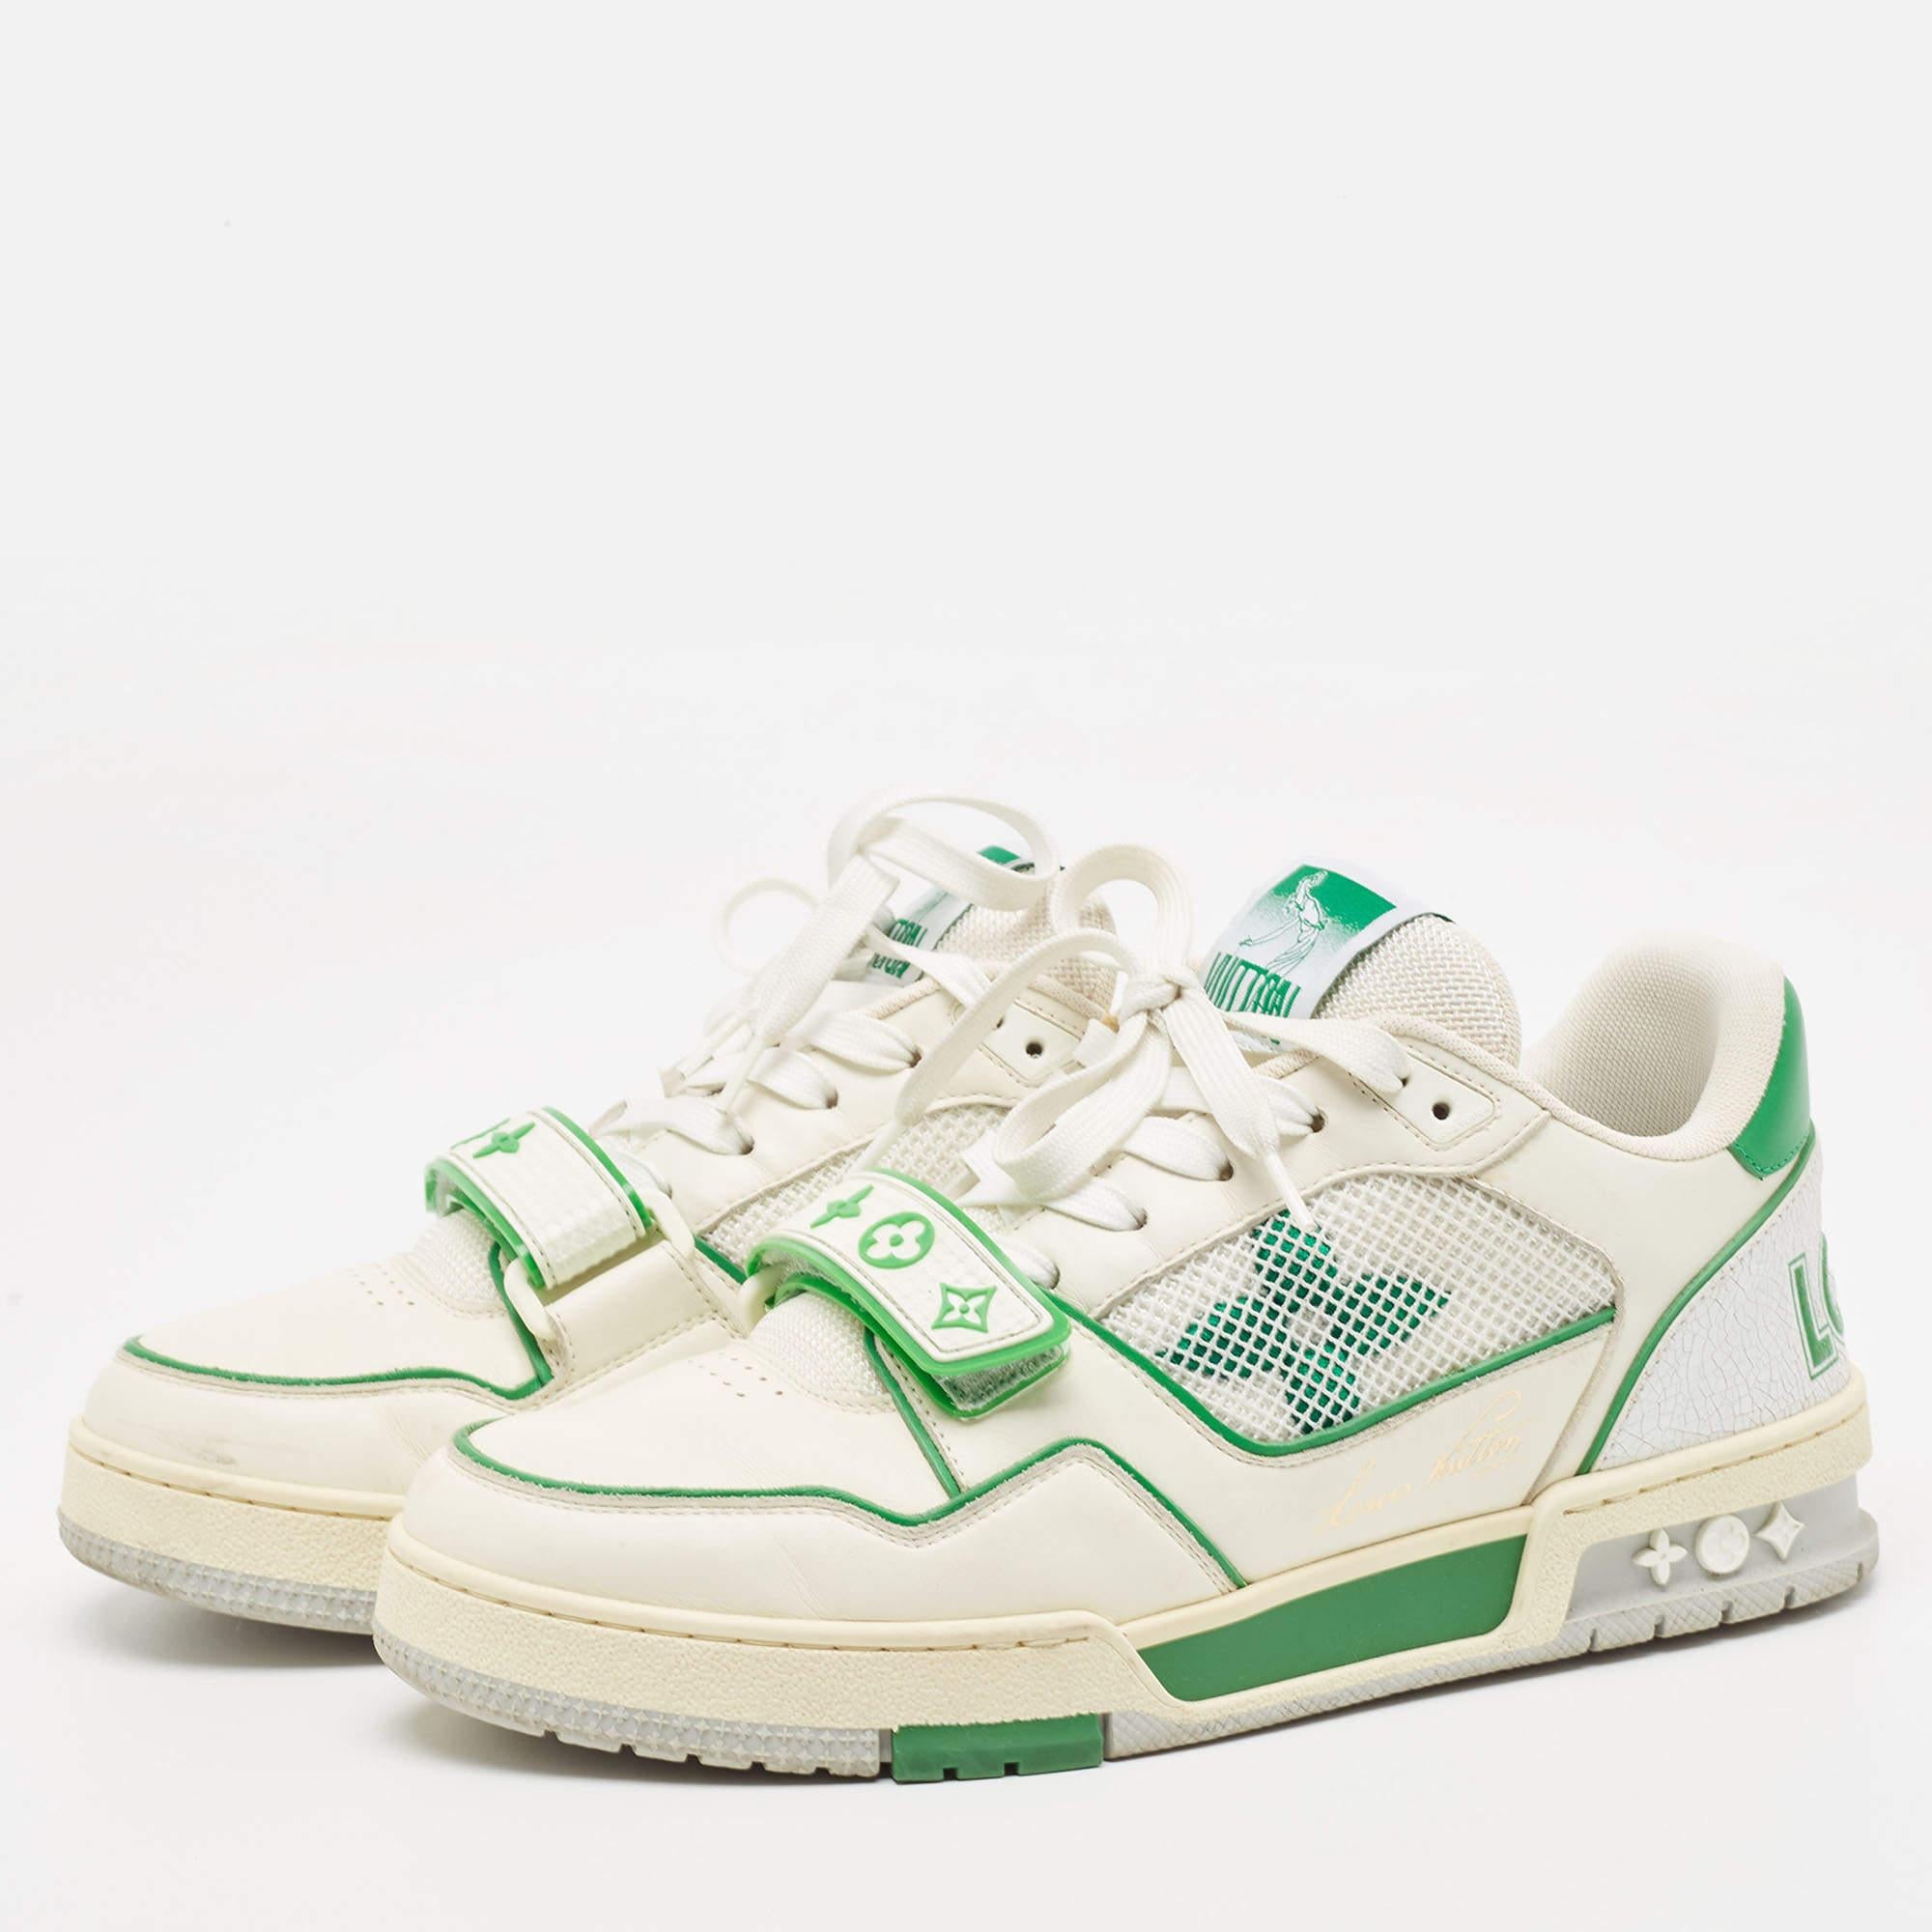 Louis Vuitton White/Green Leather and Mesh Low Top Sneakers Size 40 5